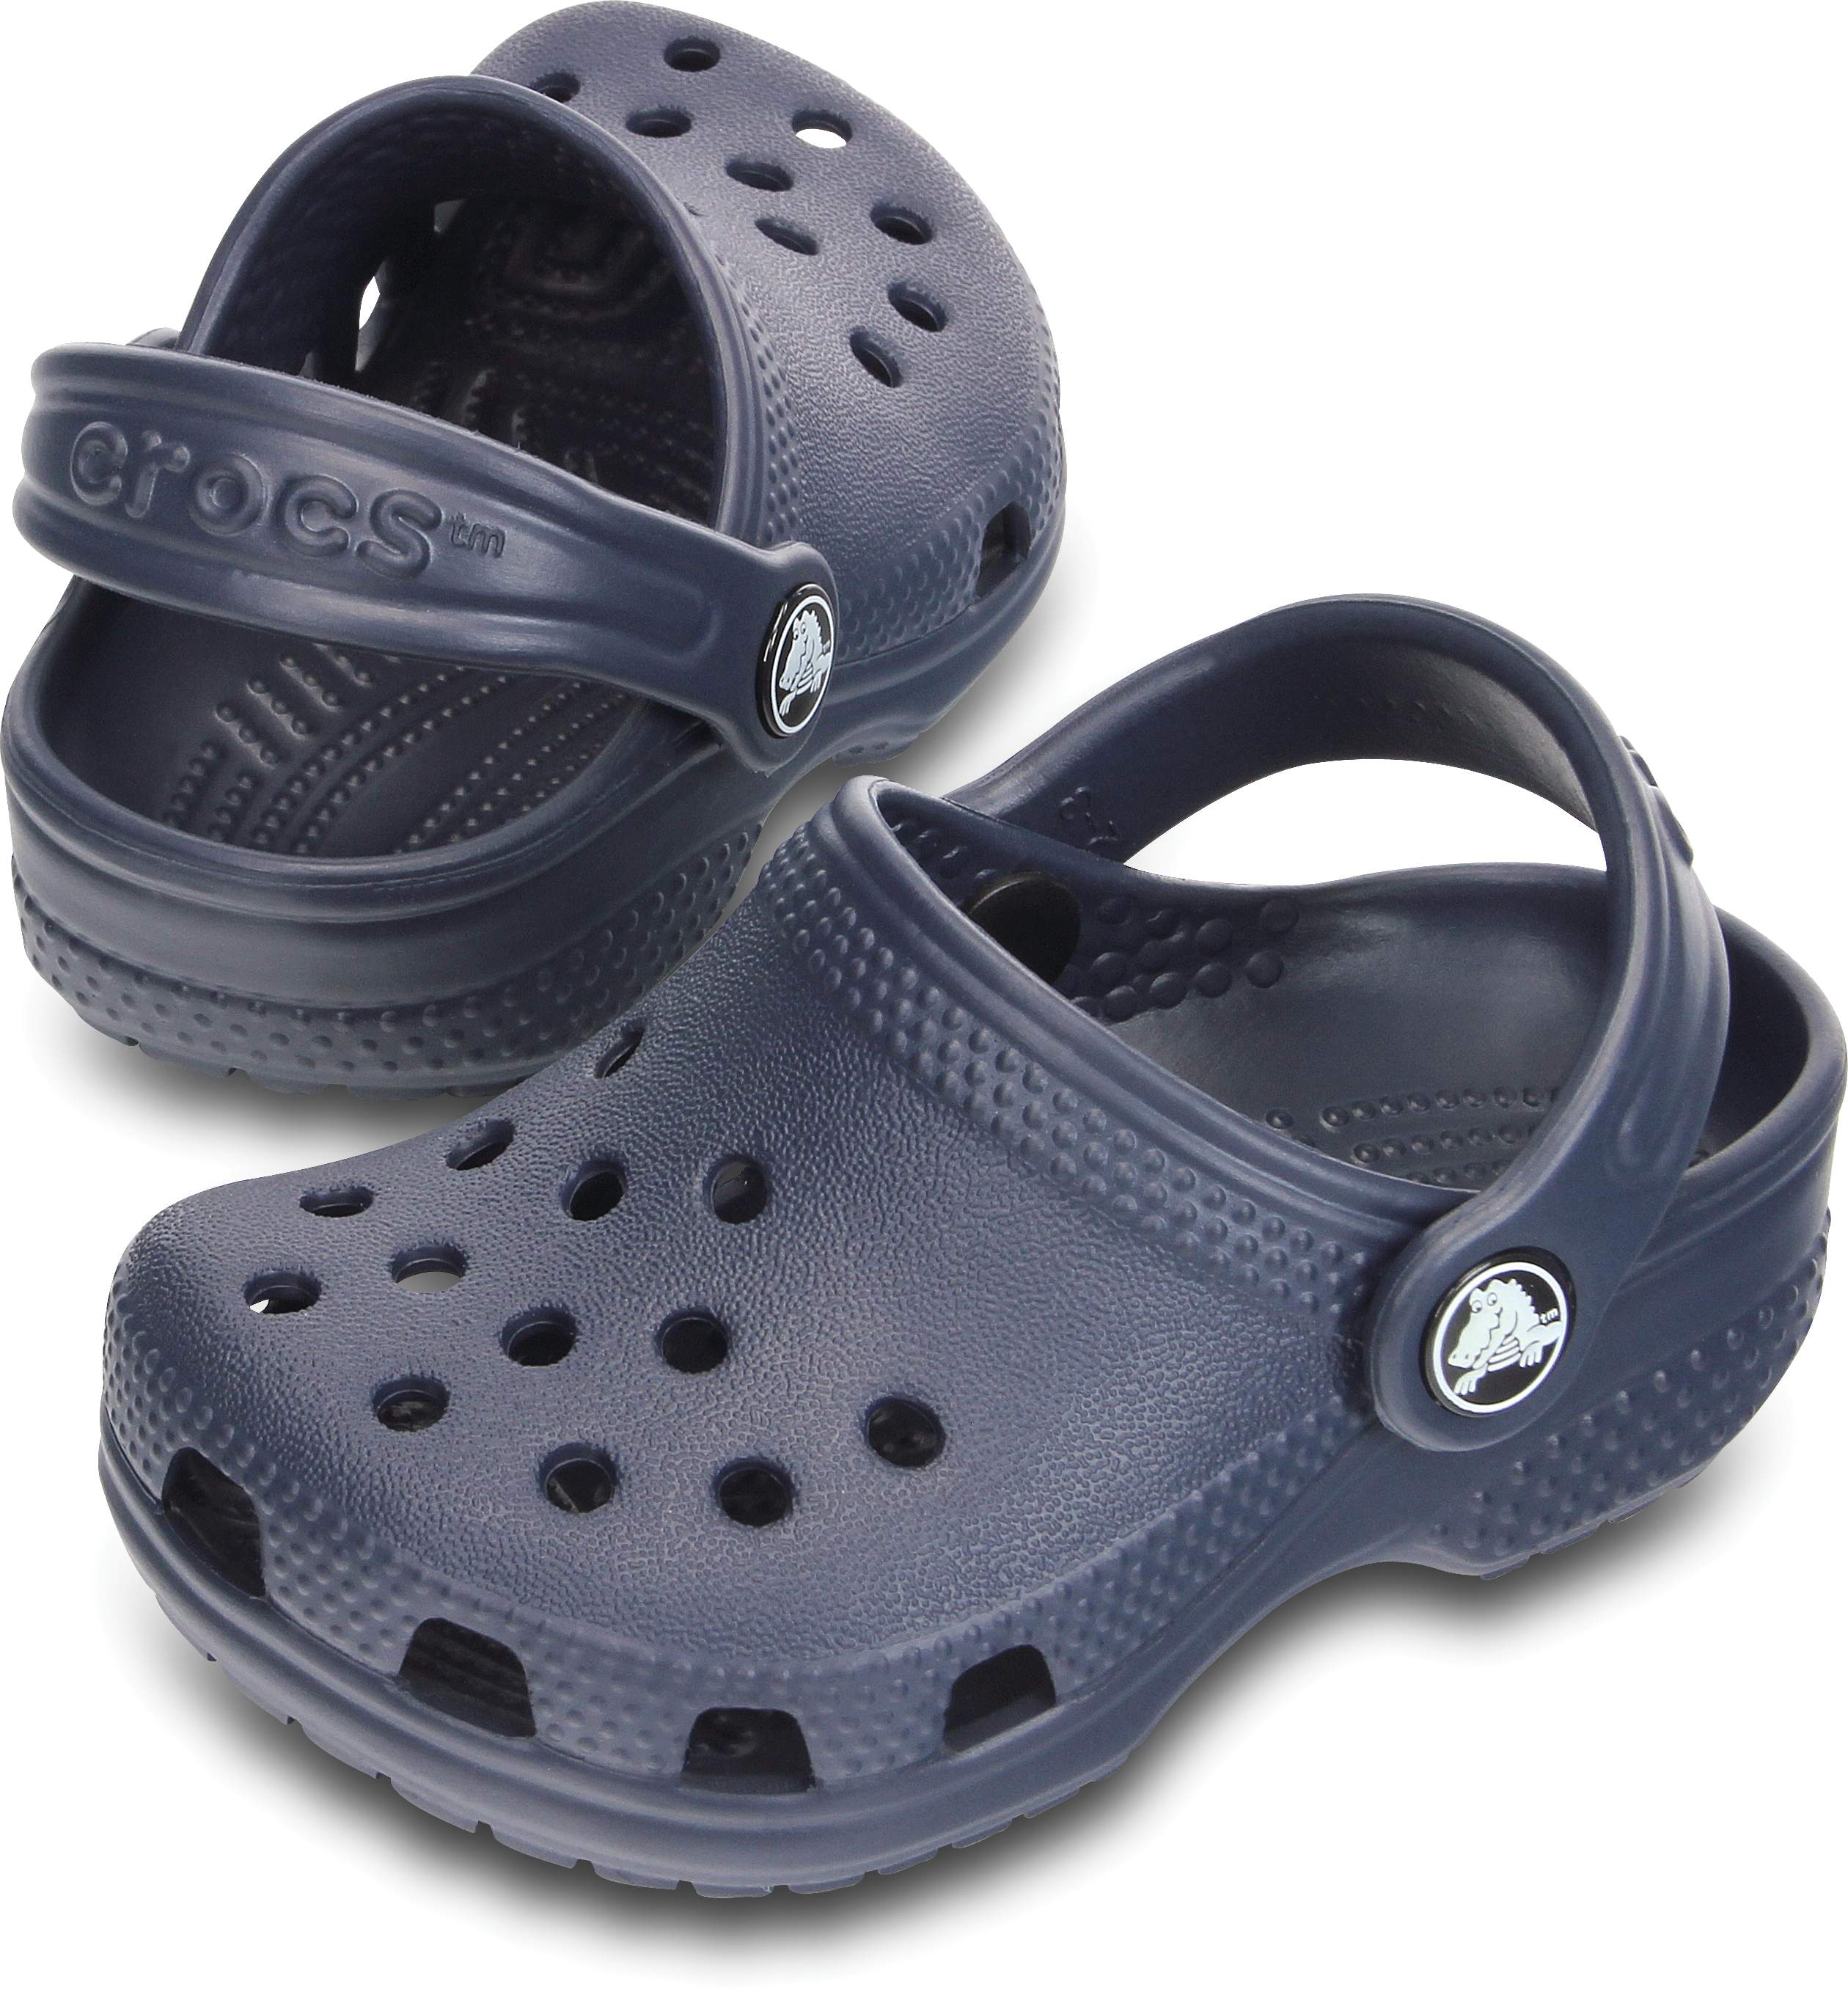 crocs baby shoes size chart